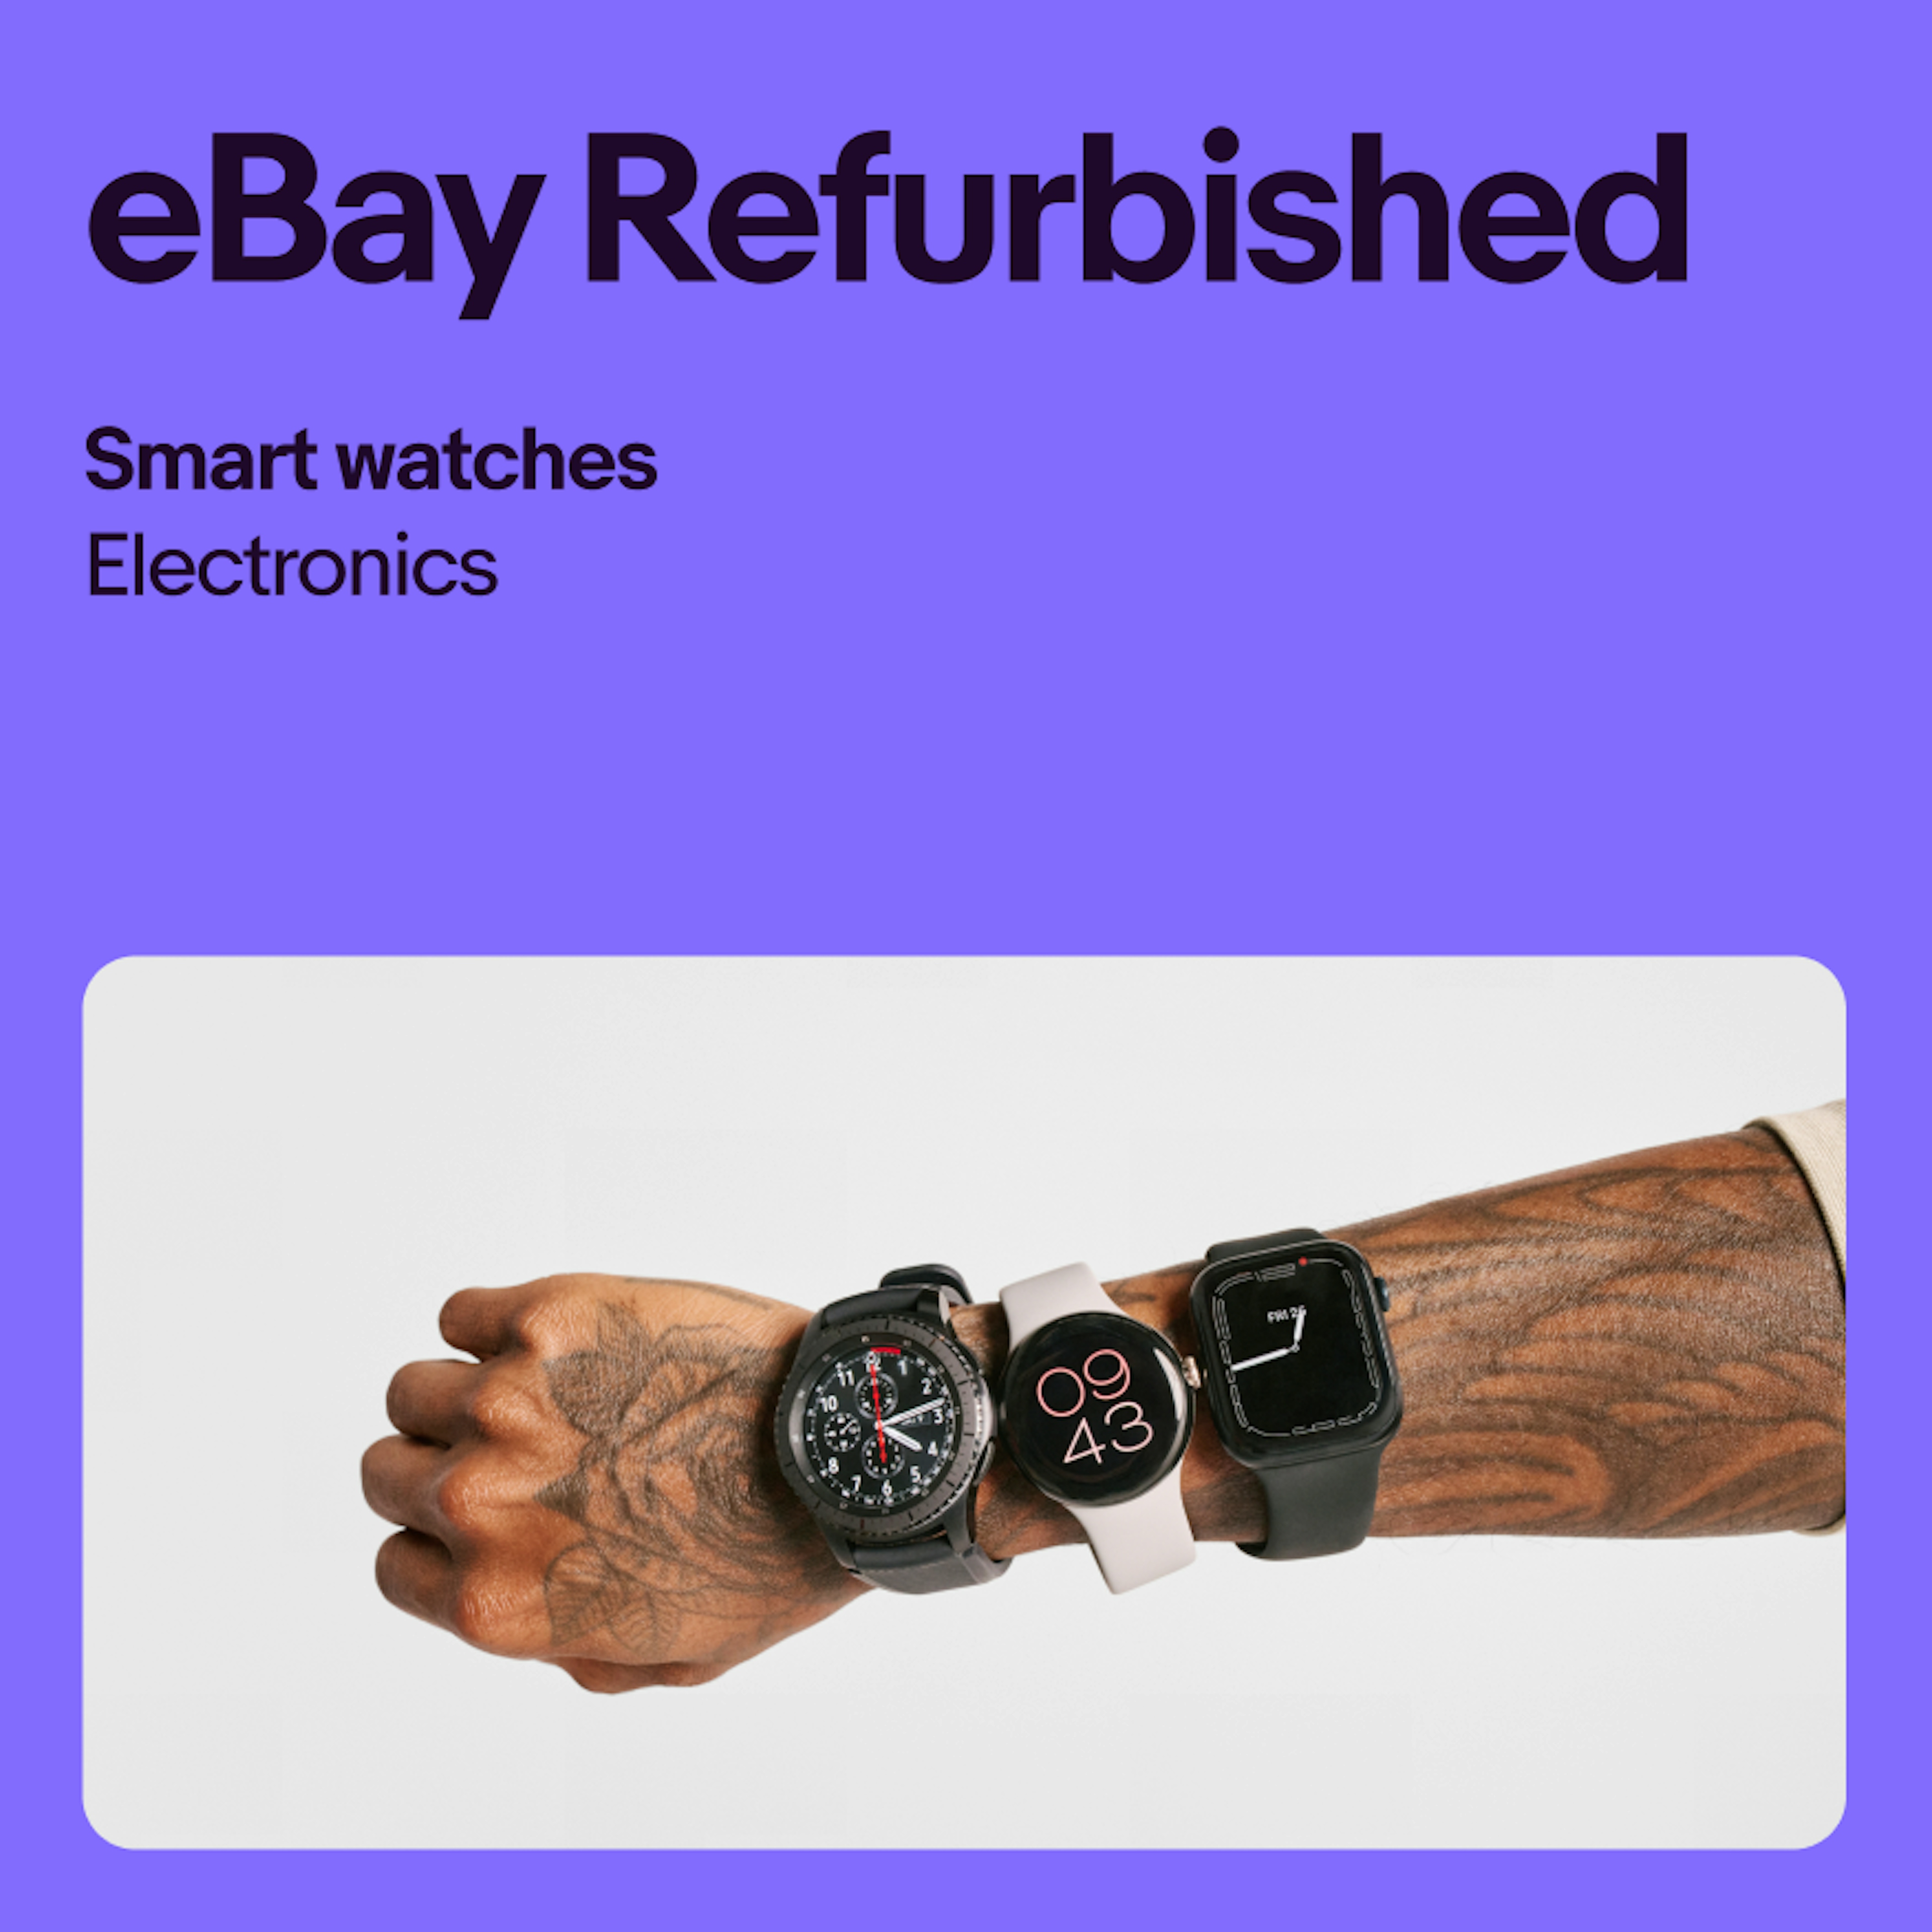  A vibrant purple ad for smart watches. The headline has “eBay Refurbished”.